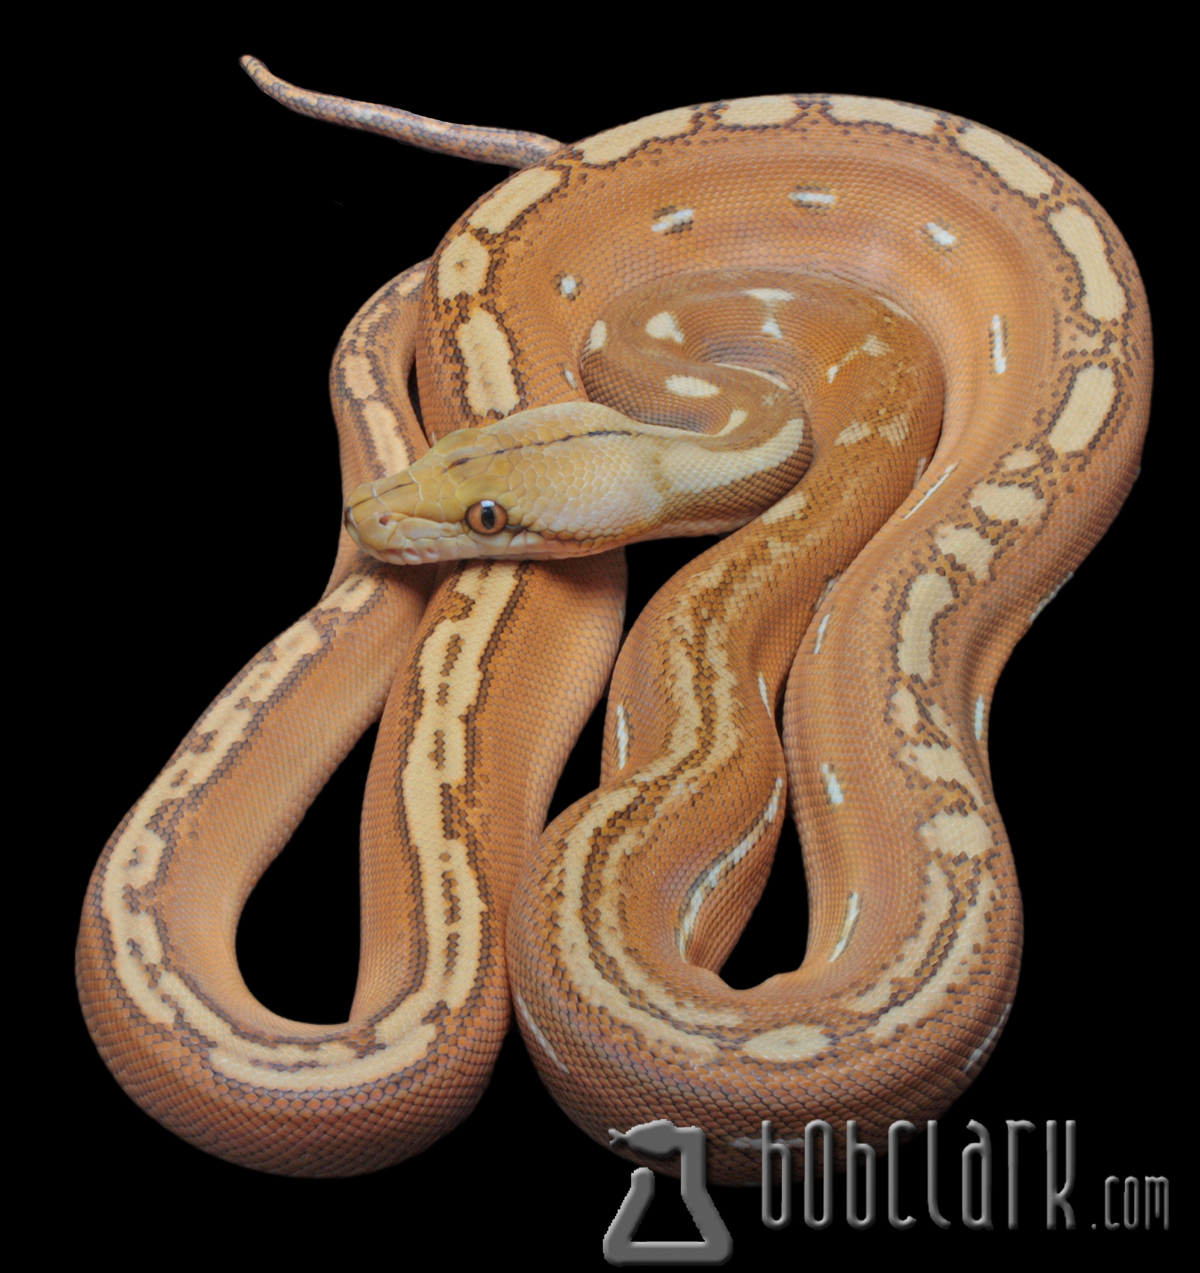 Bob clark reptiles available reticulated pythons